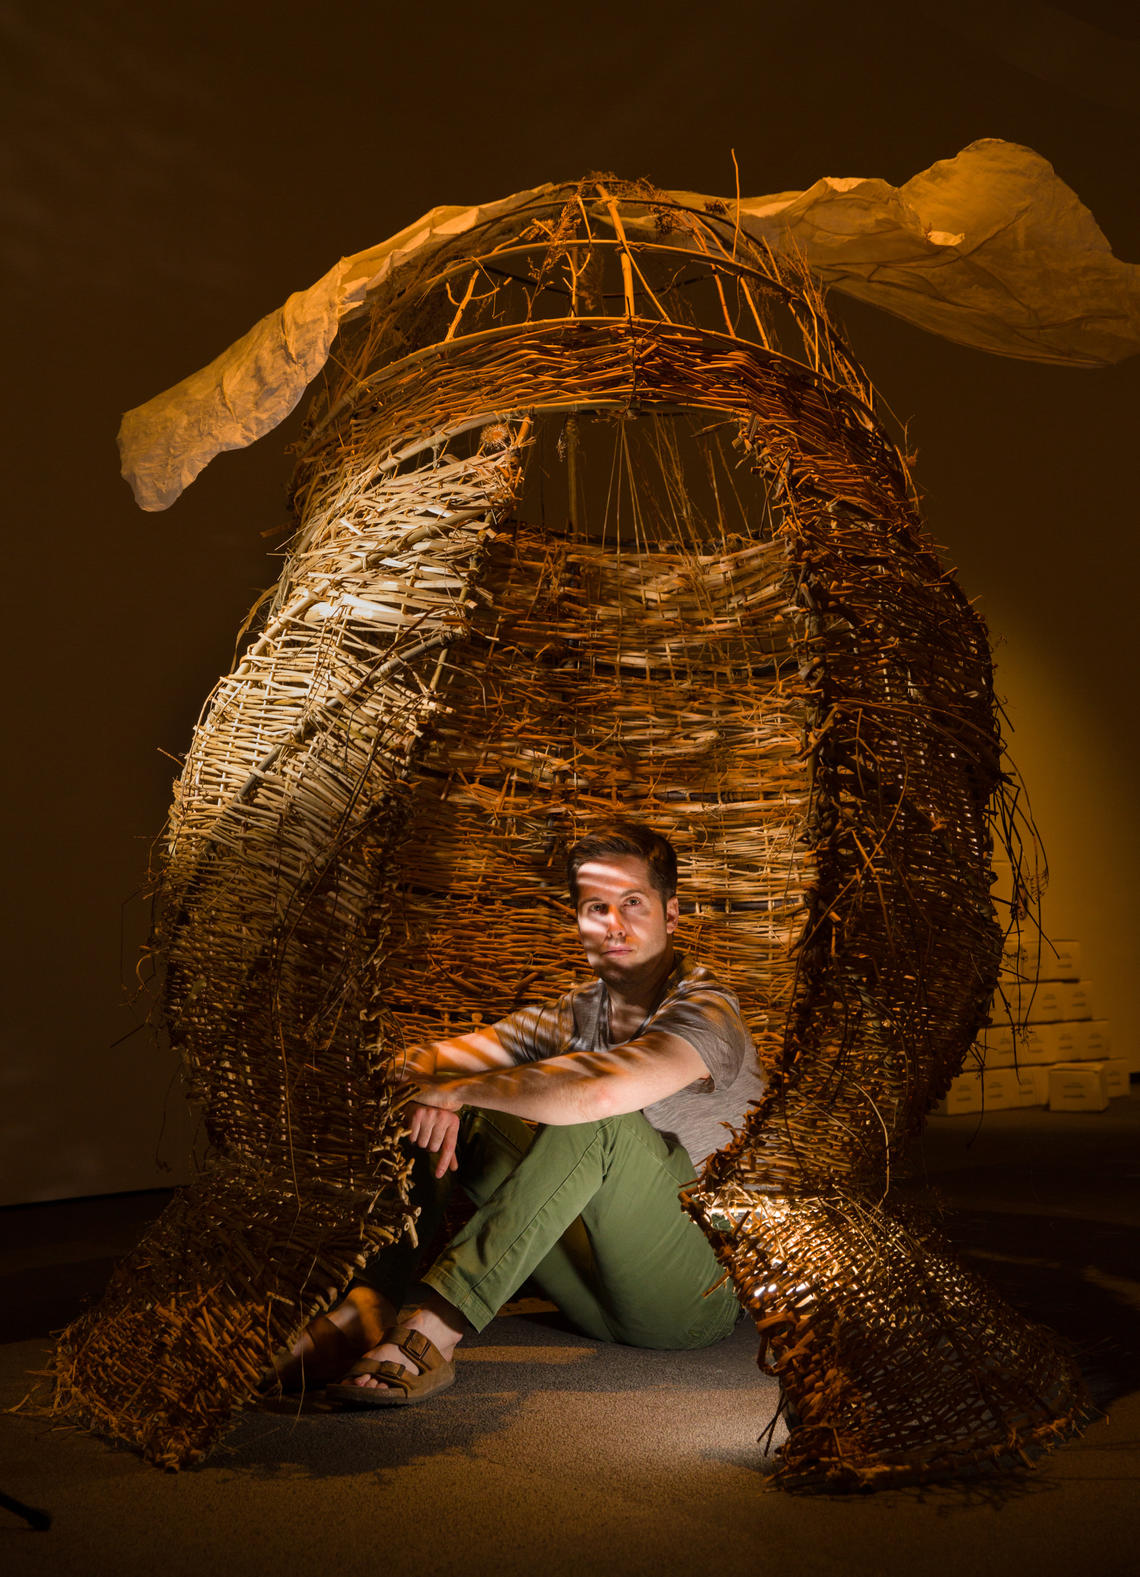 Dylan McLernon, a master’s student in fine arts at the University of Calgary, weaves art with science to help combat widespread bee mortality caused by human development. Using sustainable and upcycled materials like wood and clay, McLernon is creating a series of public sculptures that will serve as bee habitats.